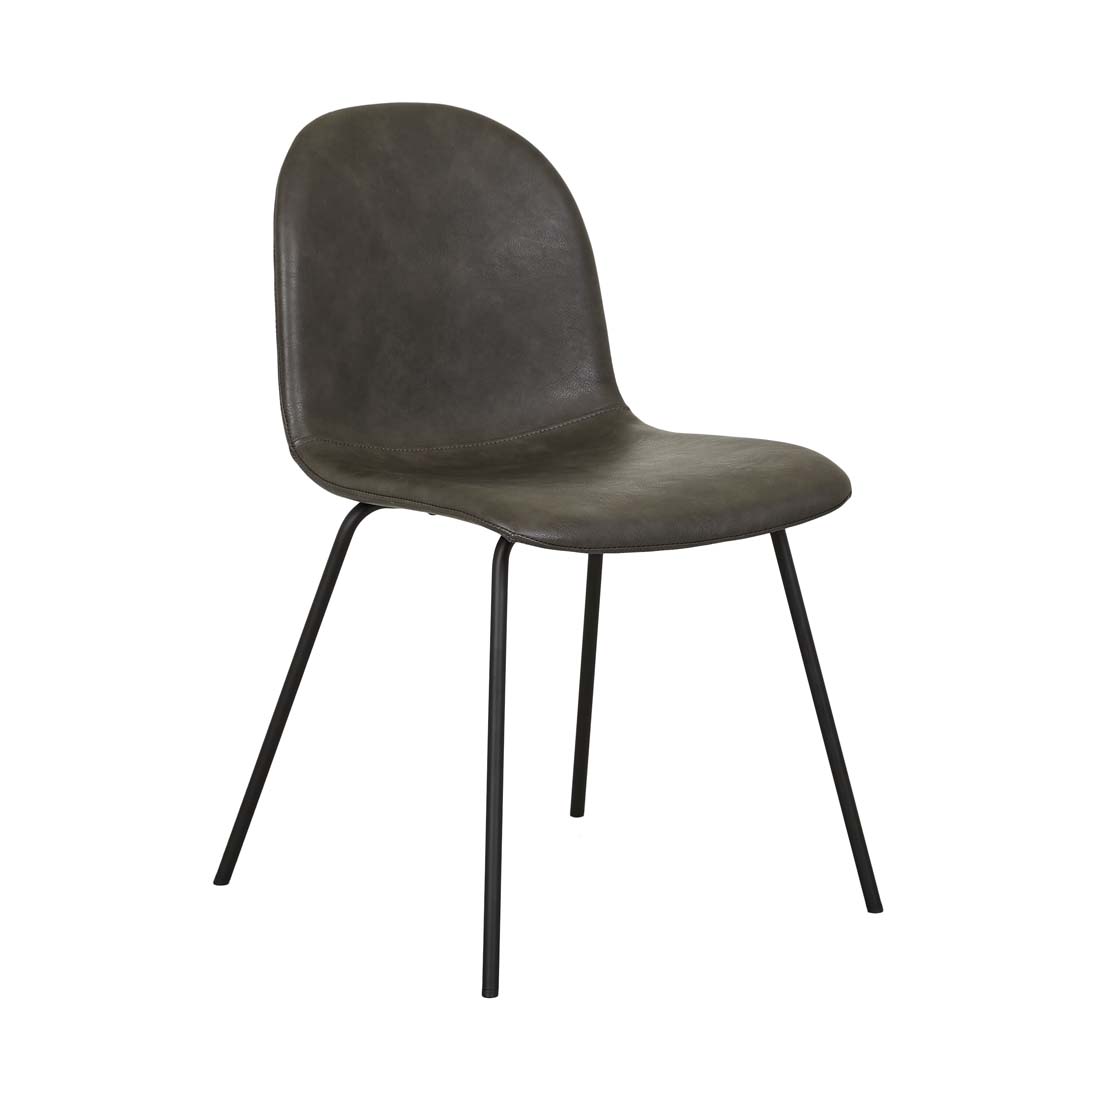 Smith Straight Leg Dining Chair image 0